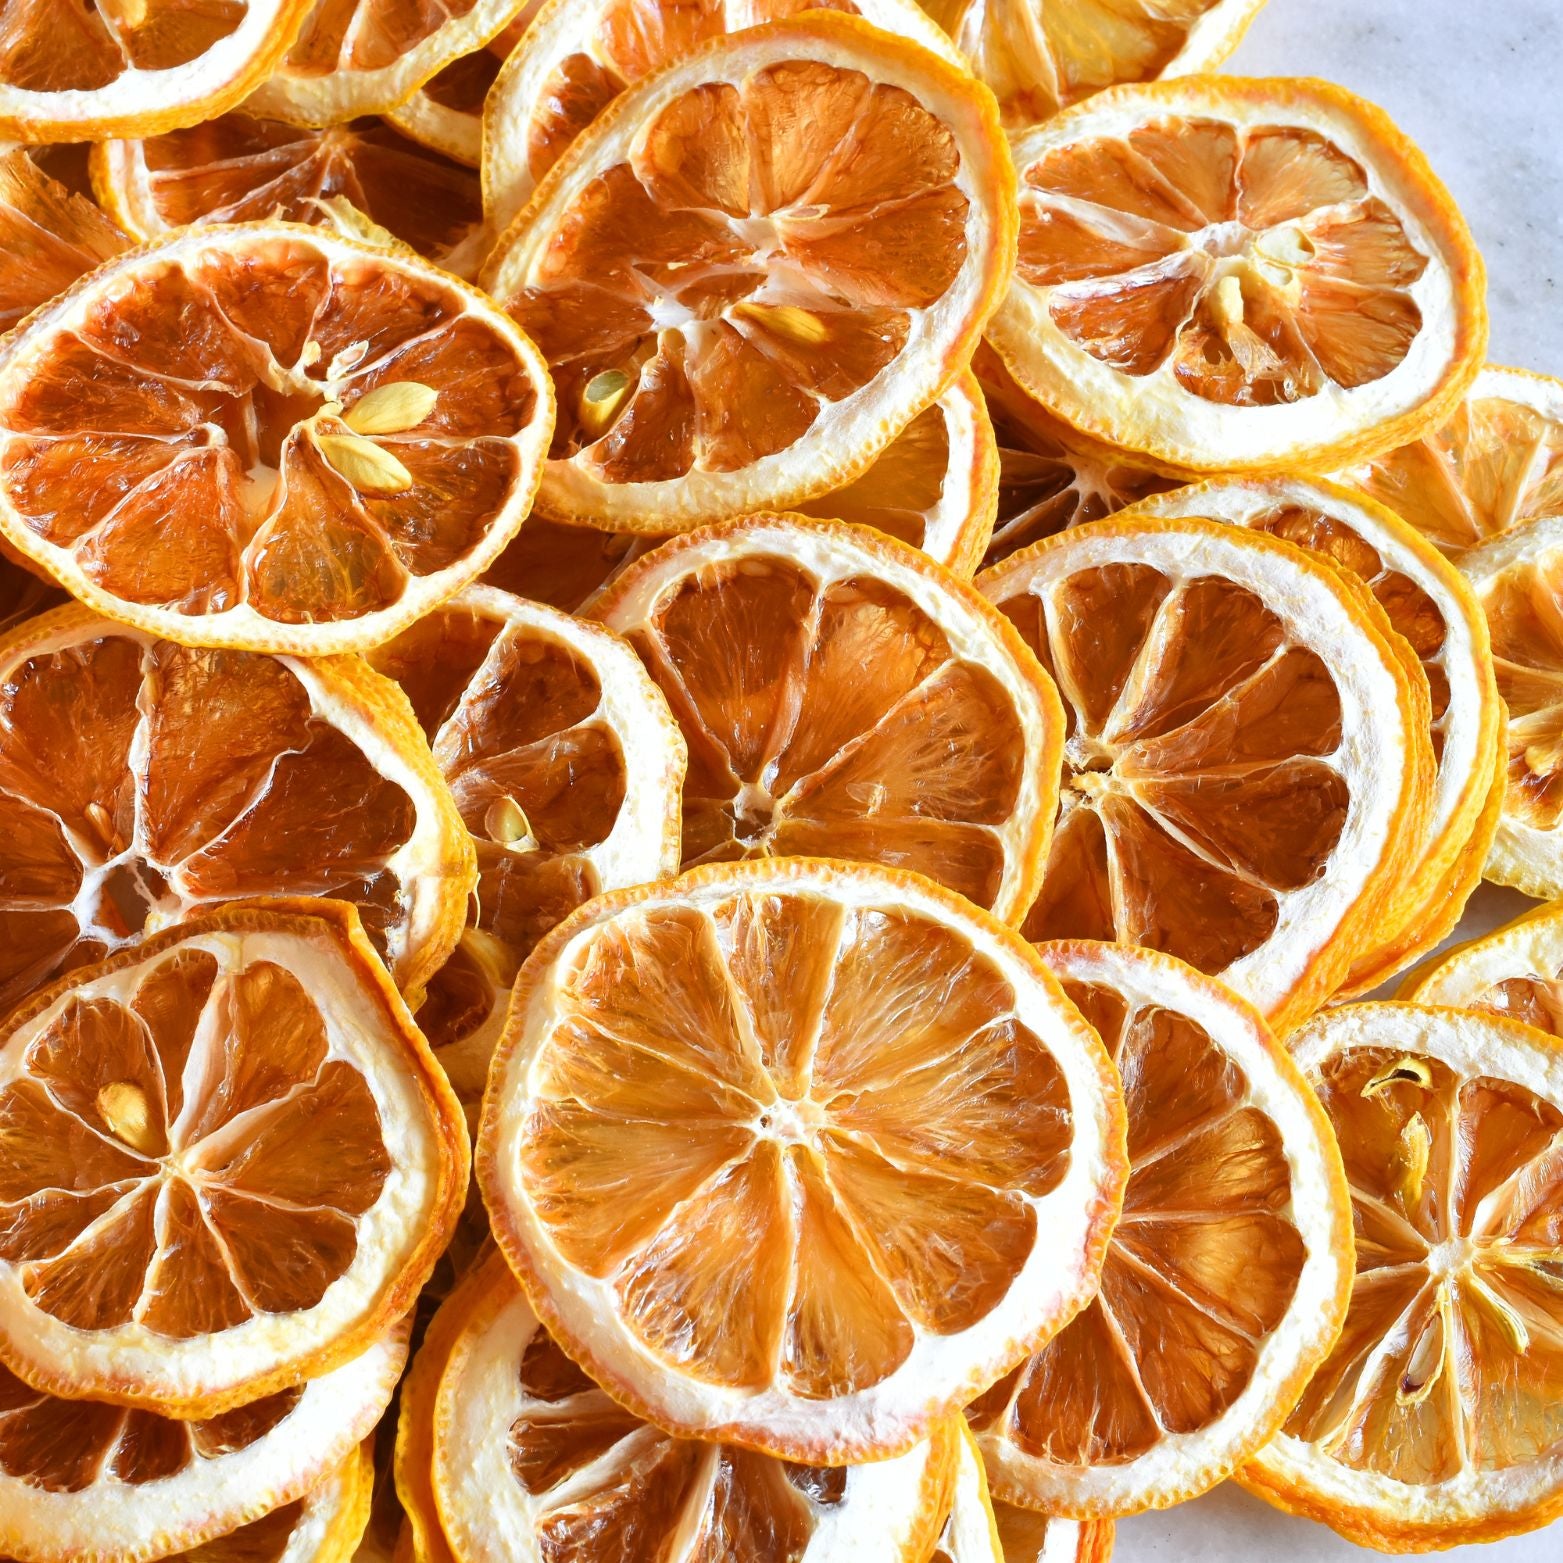 A close-up image of many thinly sliced Super Bargain Shop dehydrated lemon wheels arranged closely together, highlighting their vivid orange hues and intricate texture details.